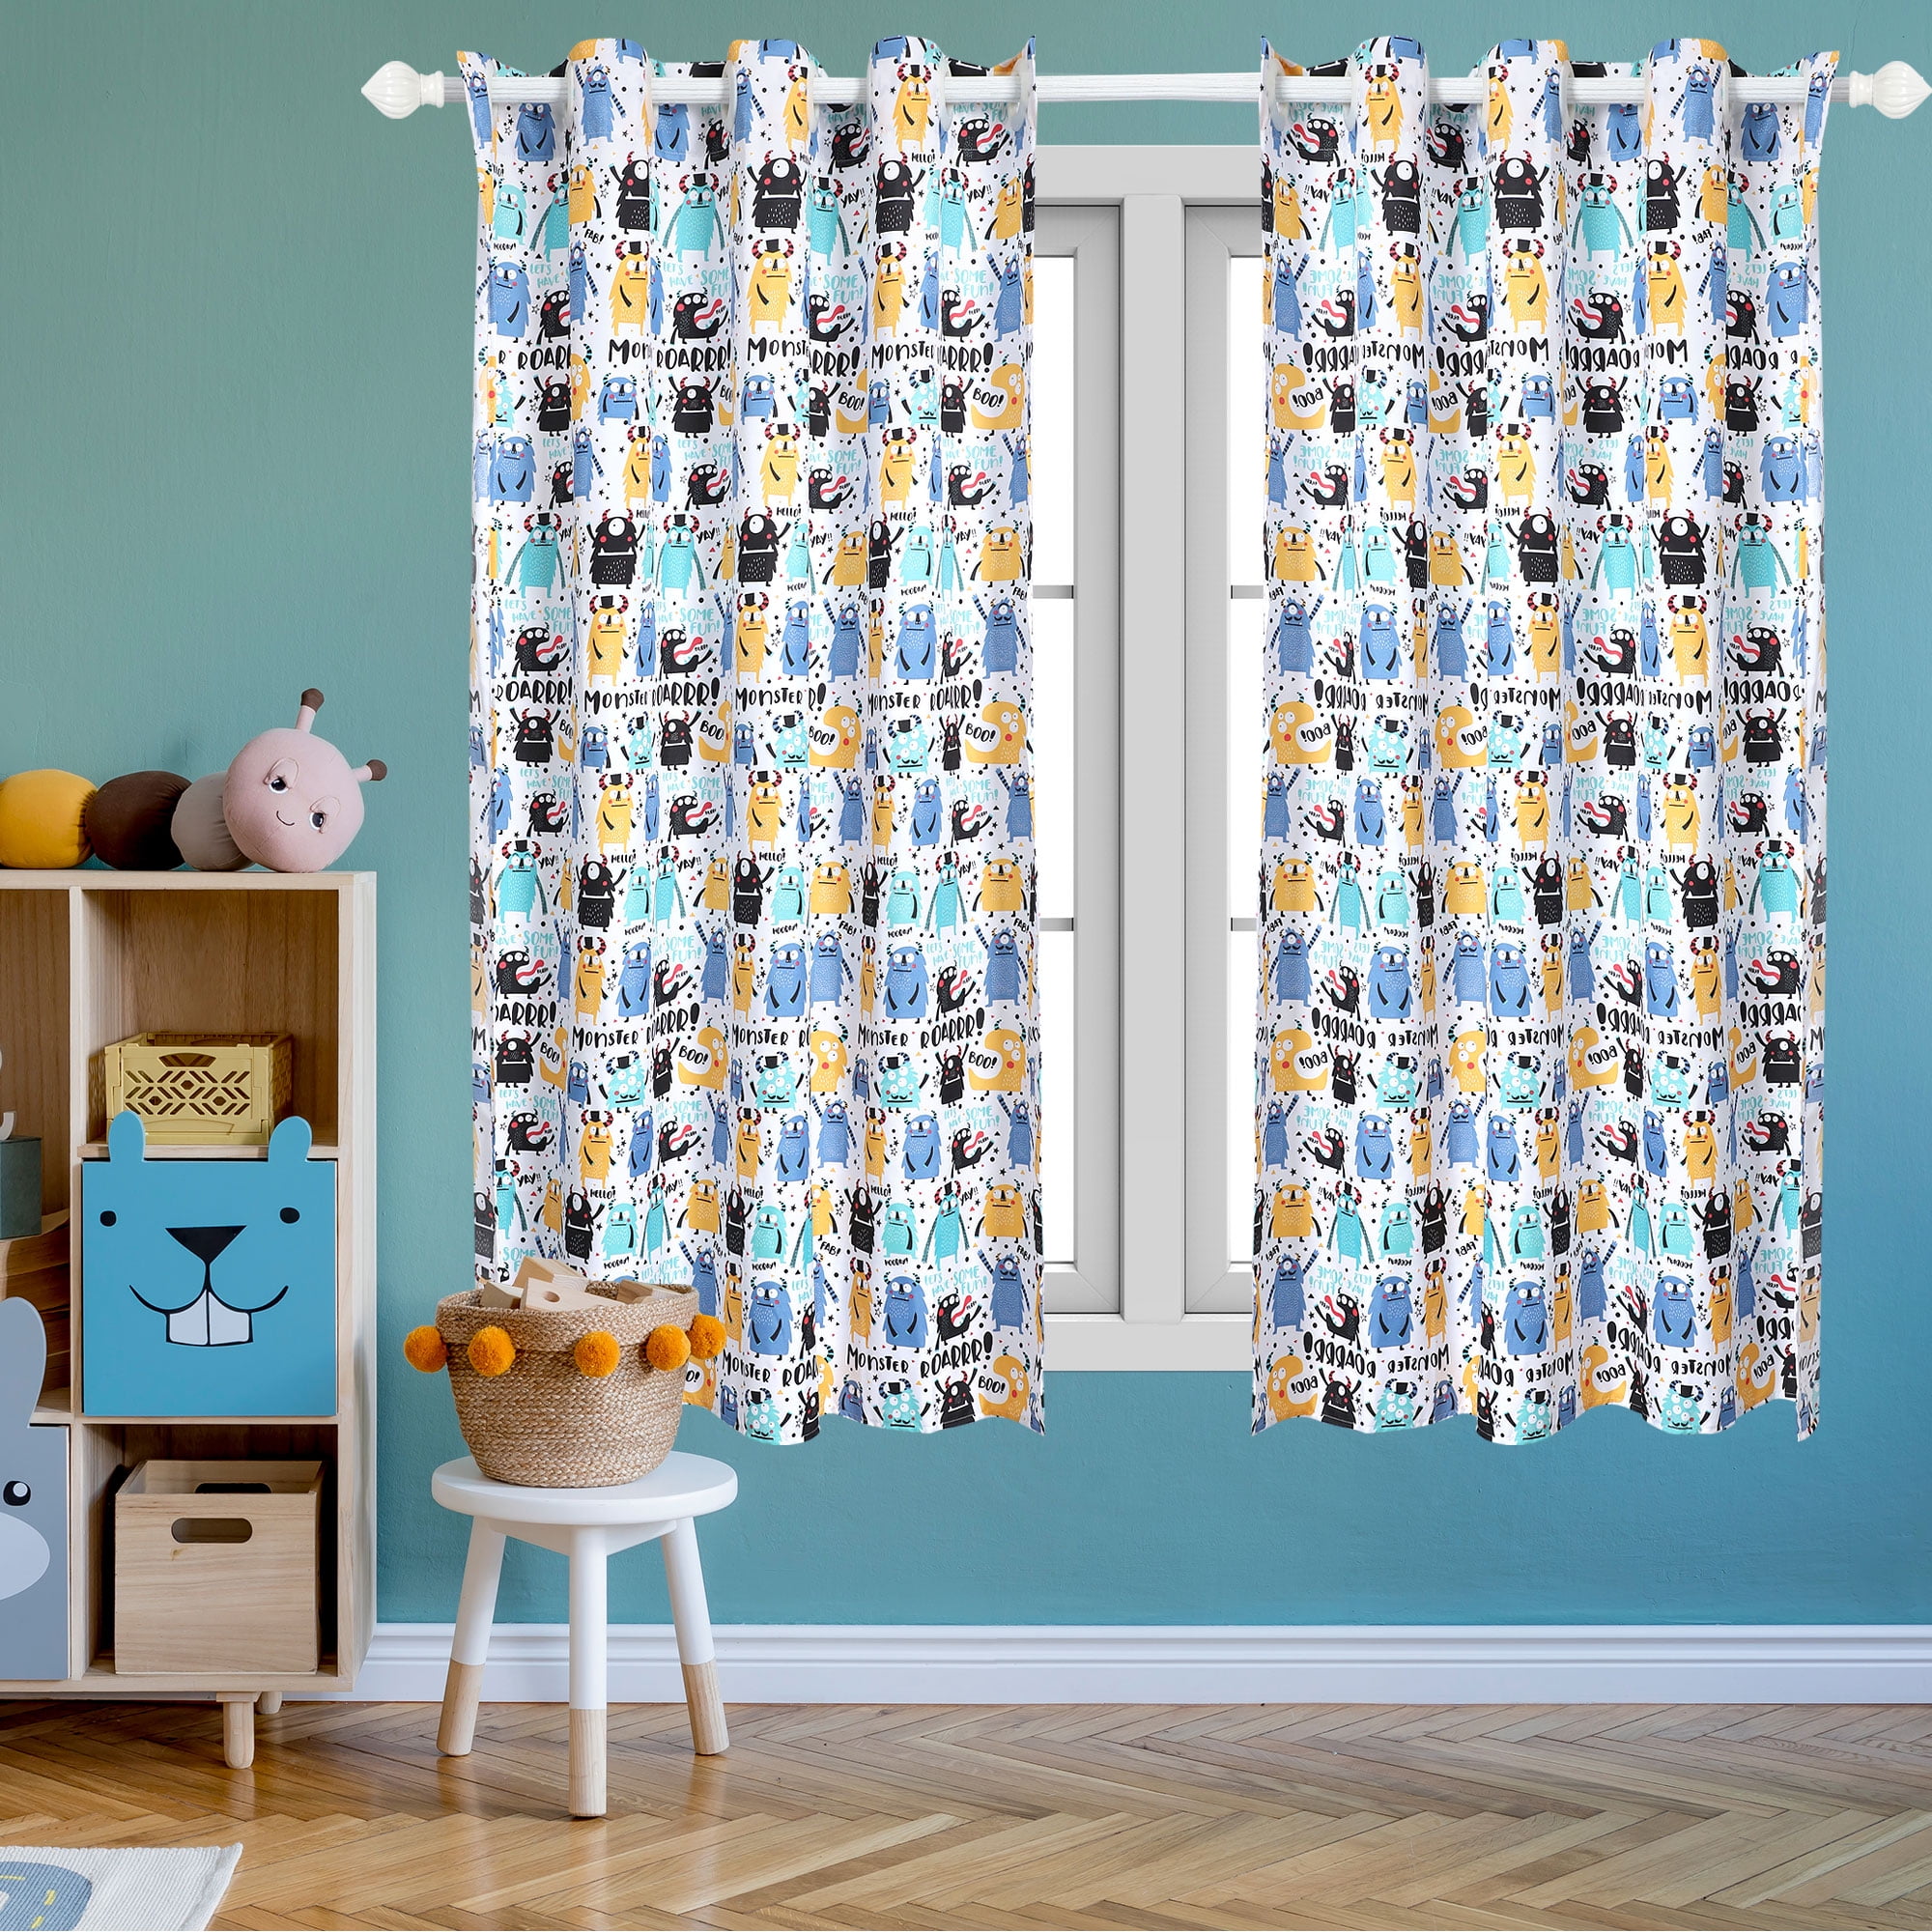 Minions Drapery Window Treatments nEw DESPICABLE ME WINDOW CURTAIN PANELS 